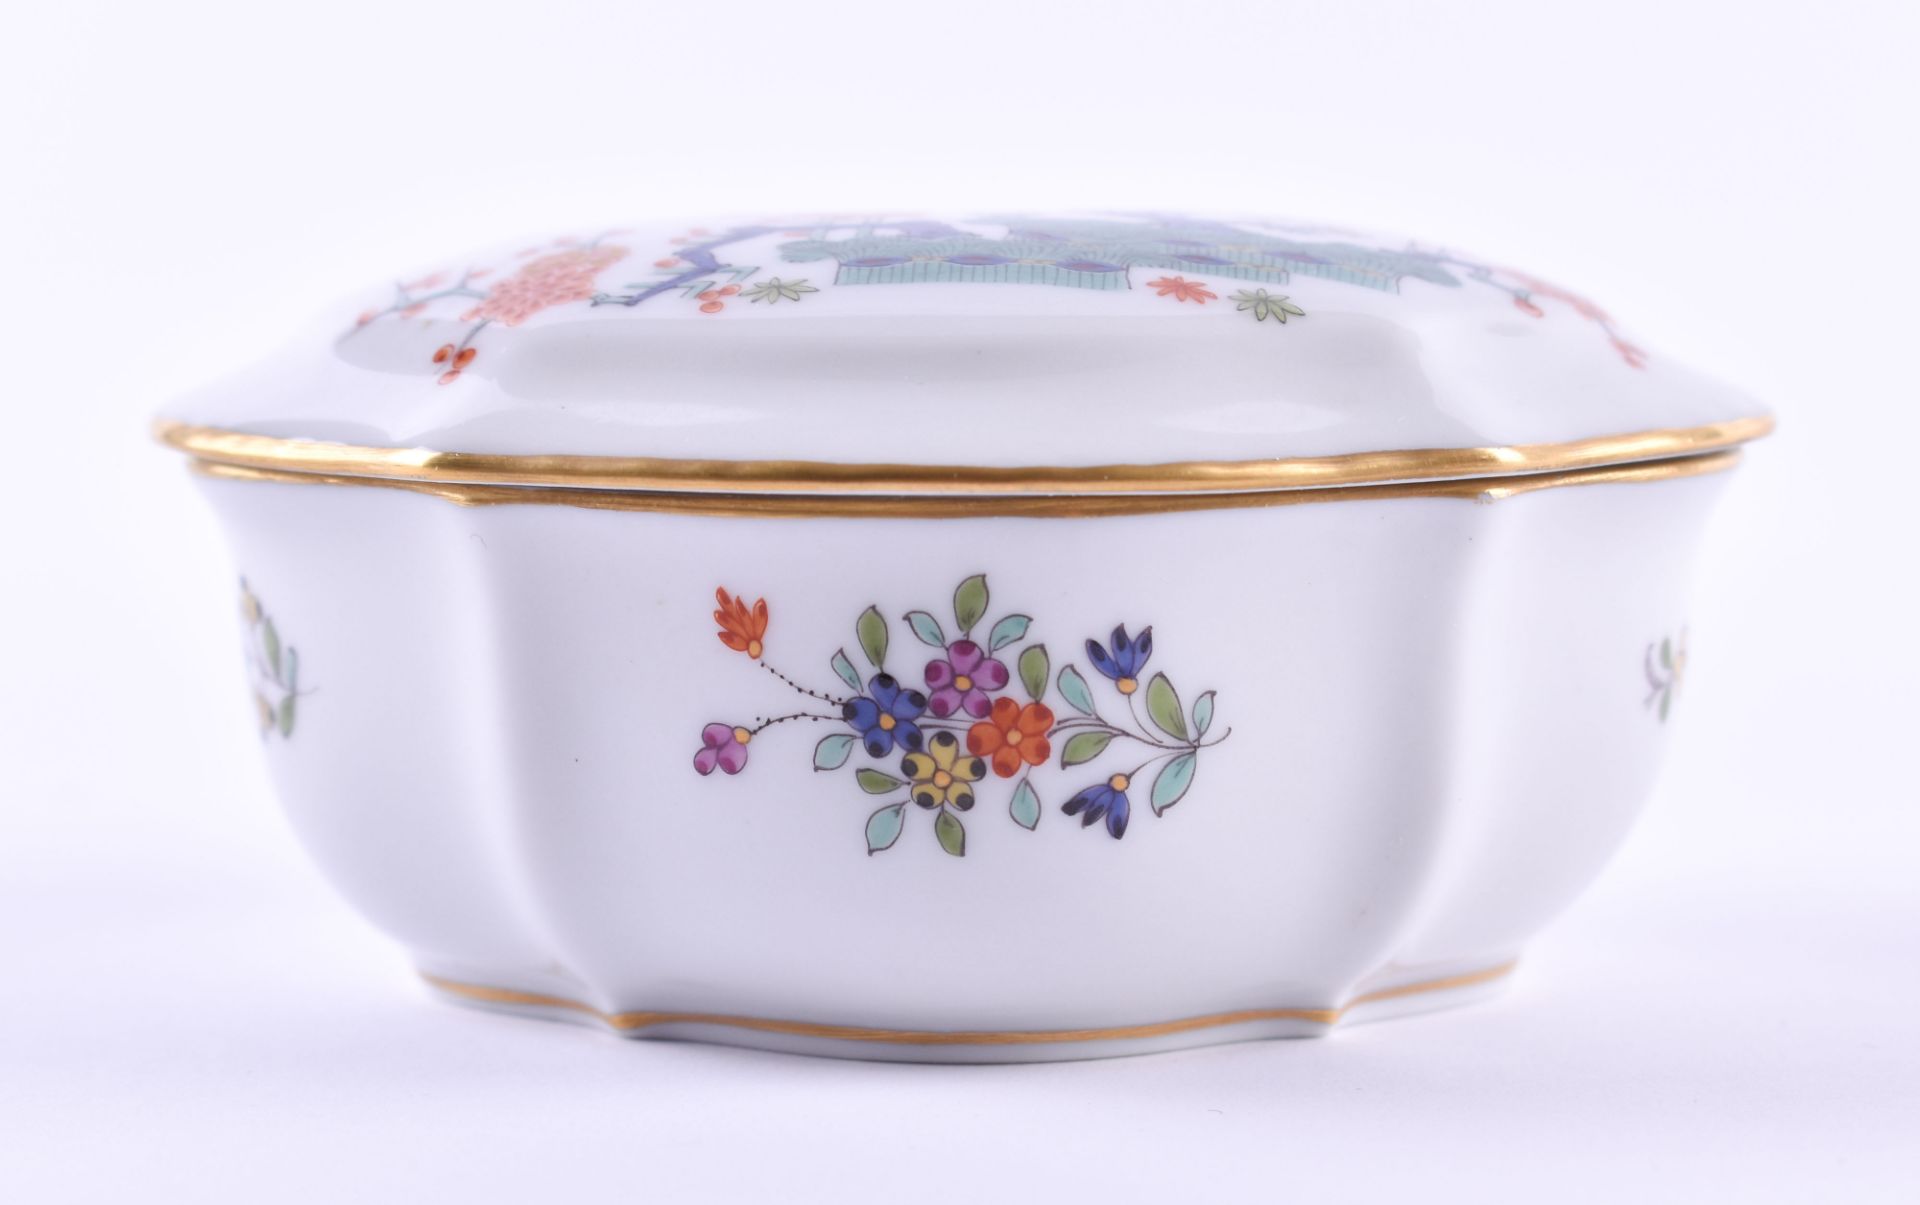 Lid box Meissen 20th centurywith Indian flower and bird painting, 10 cm x 8 cm x 4 cm, blue sword